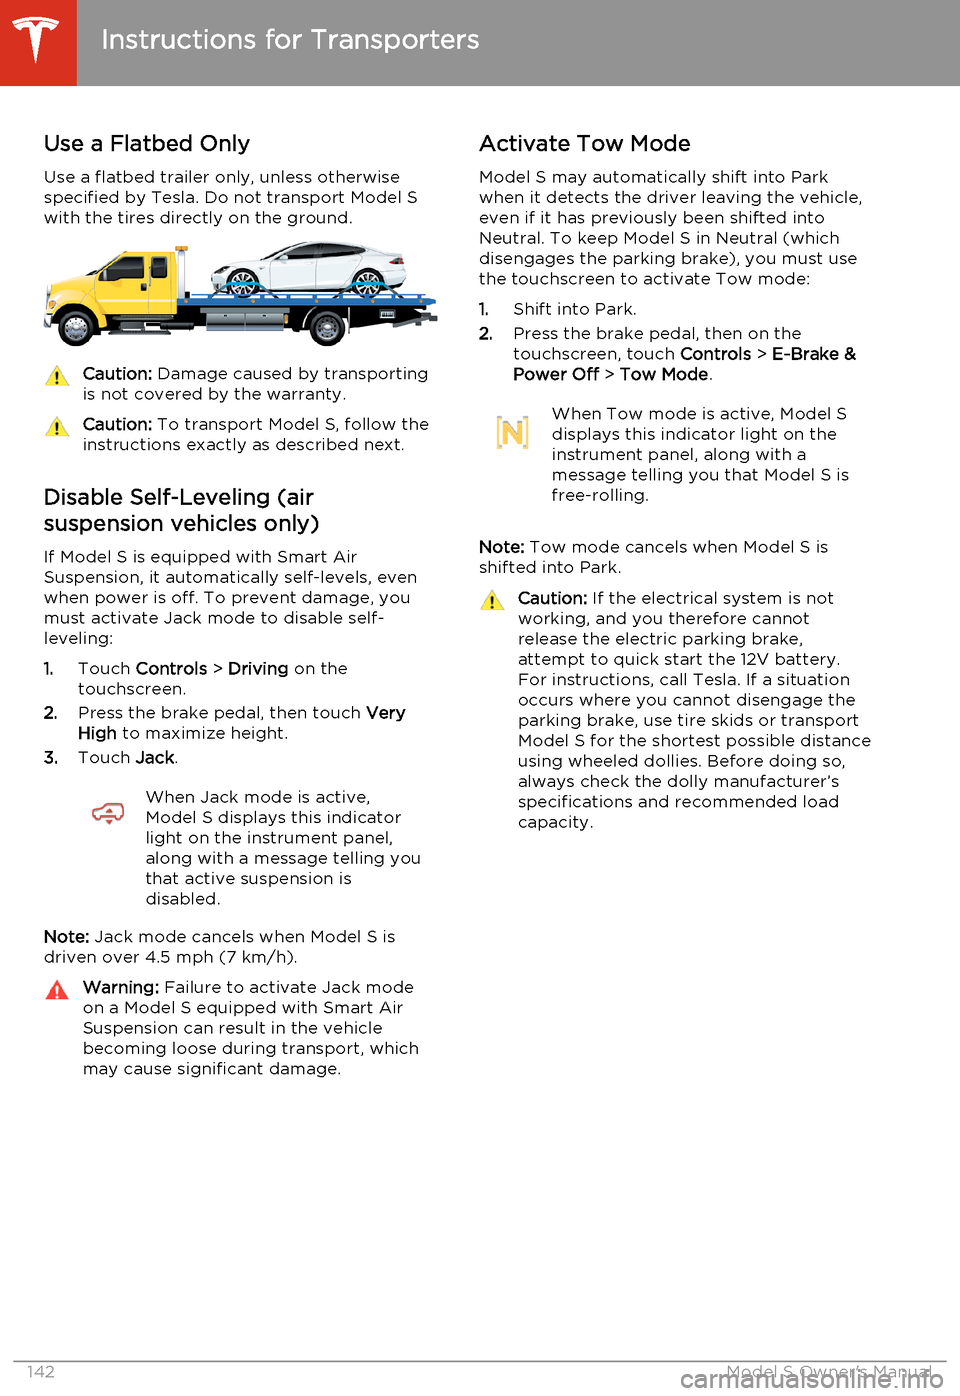 TESLA MODEL S 2014  Owners manual (North America) Use a Flatbed Only
Use a flatbed trailer only, unless otherwise
specified by Tesla. Do not transport Model S with the tires directly on the ground.Caution:  Damage caused by transporting
is not covere